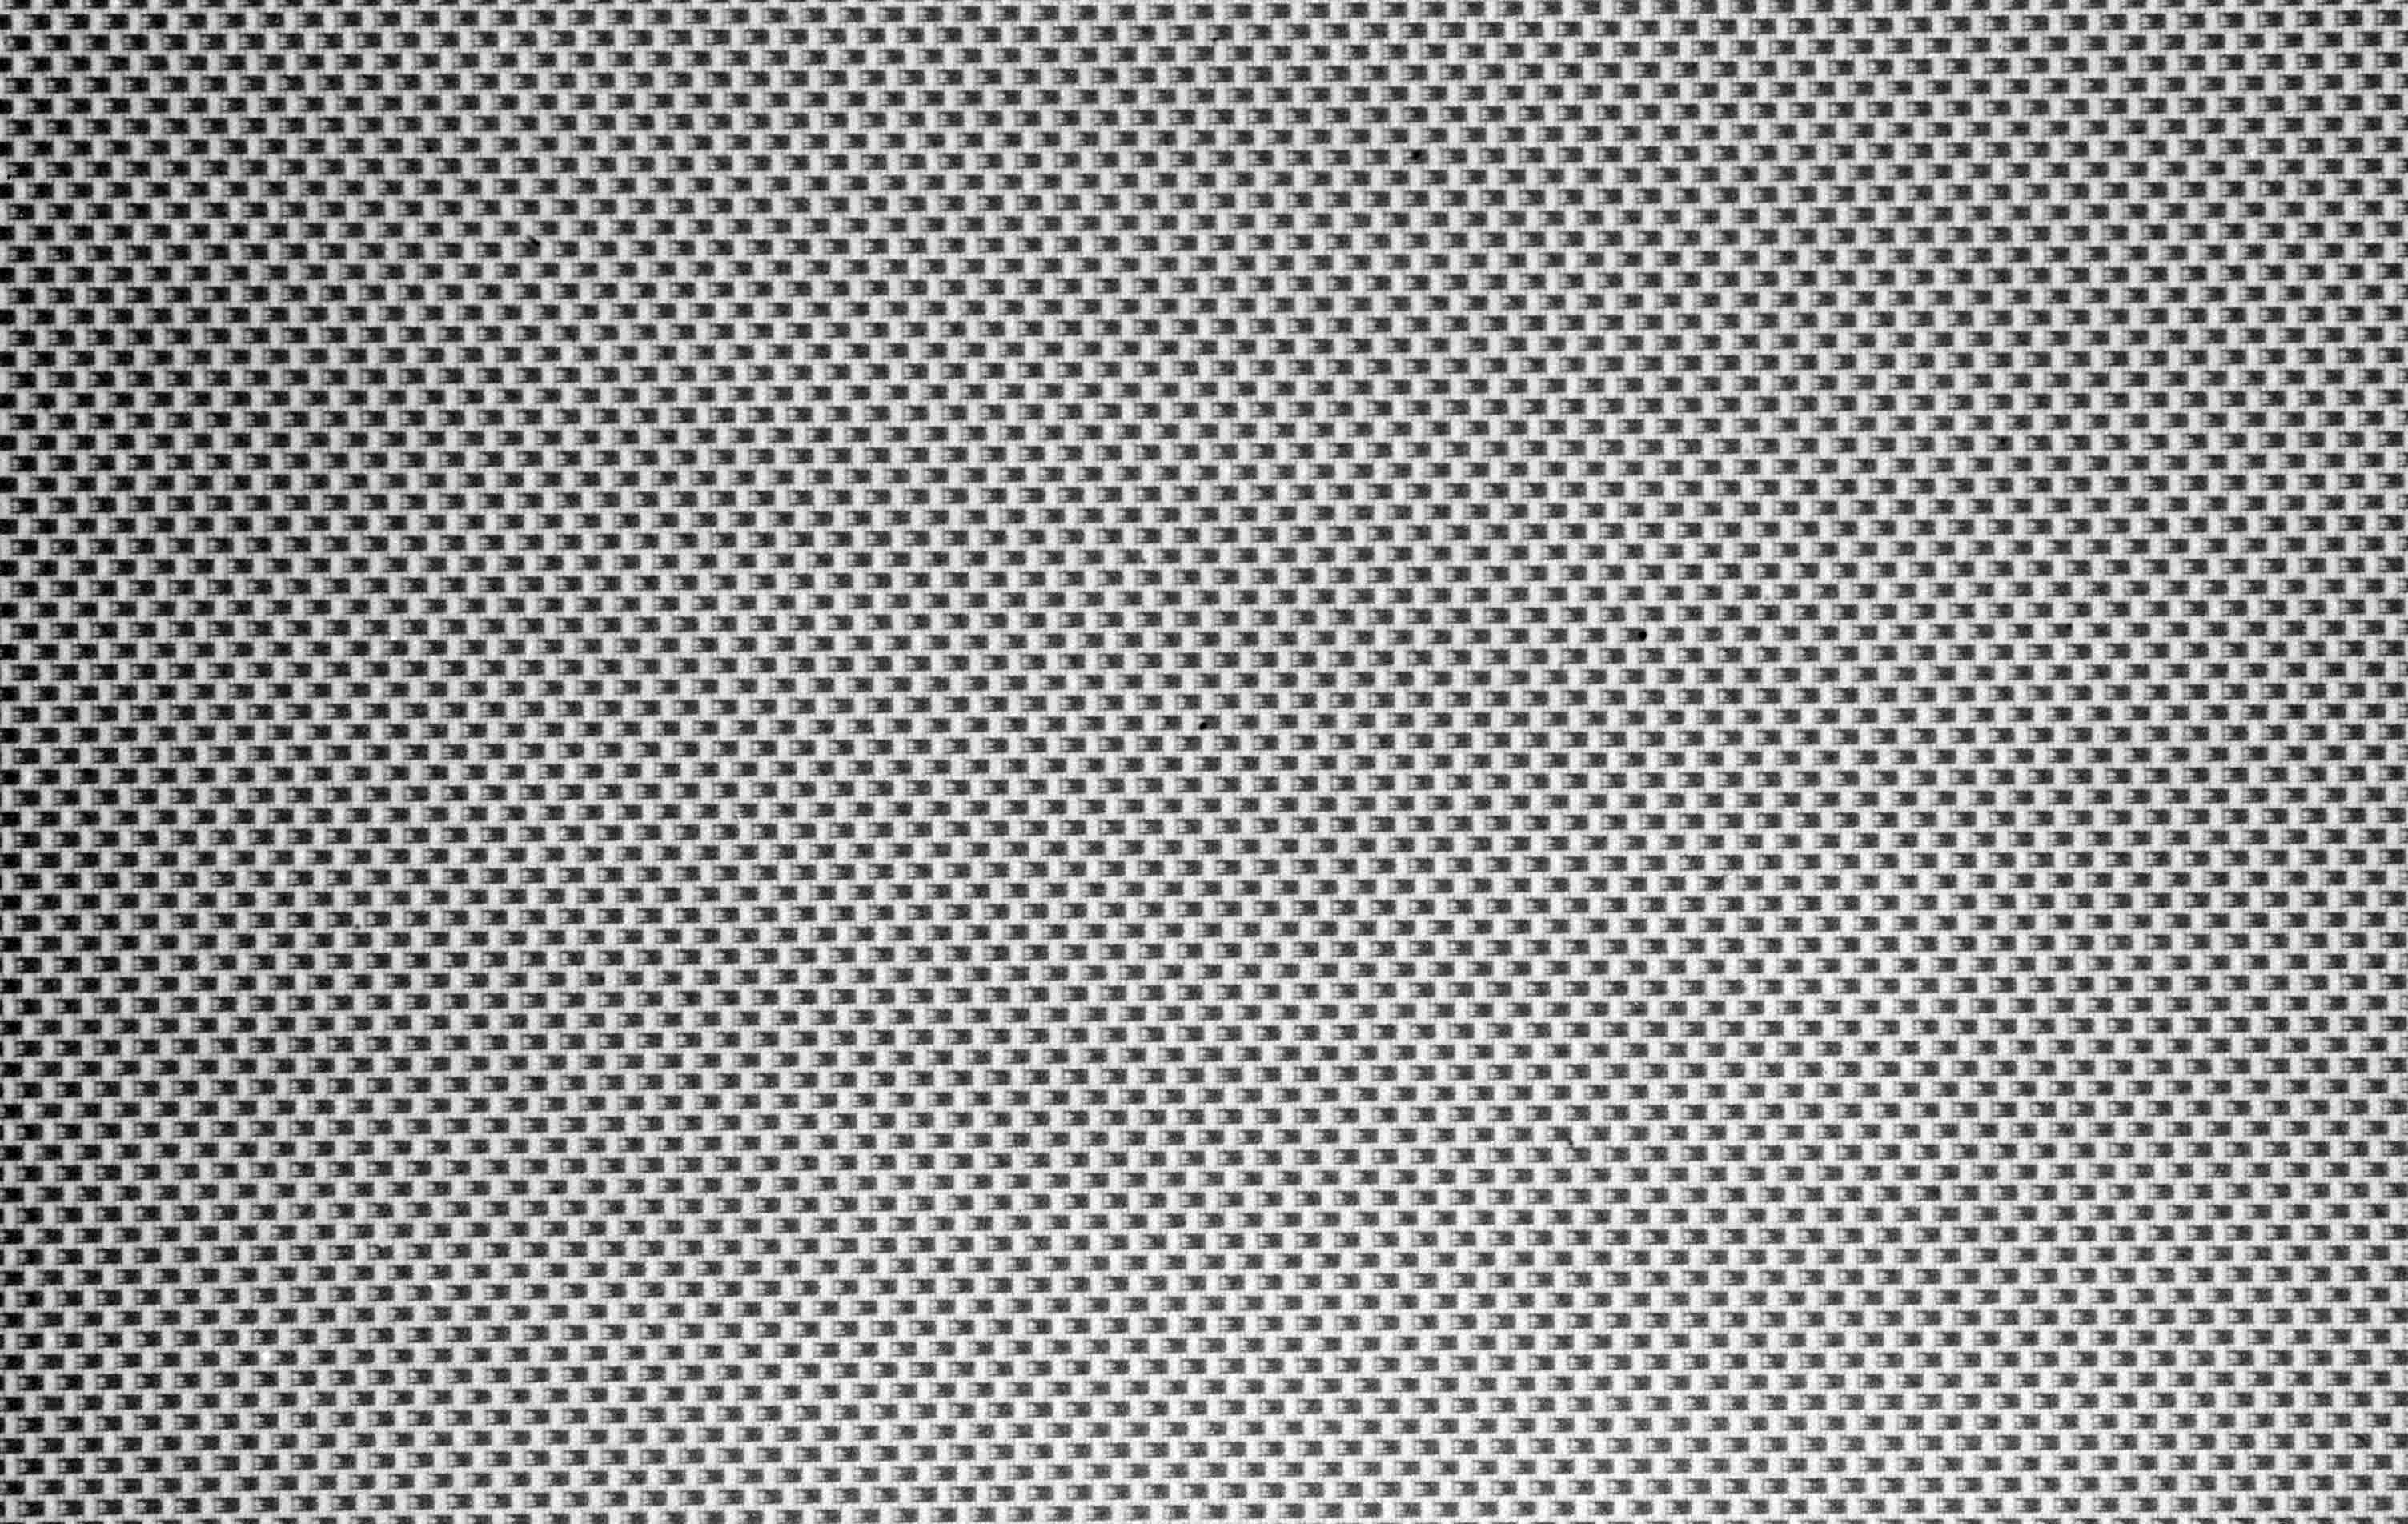 White Dots Lines Background HD White Background Wallpapers | HD Wallpapers  | ID #84611